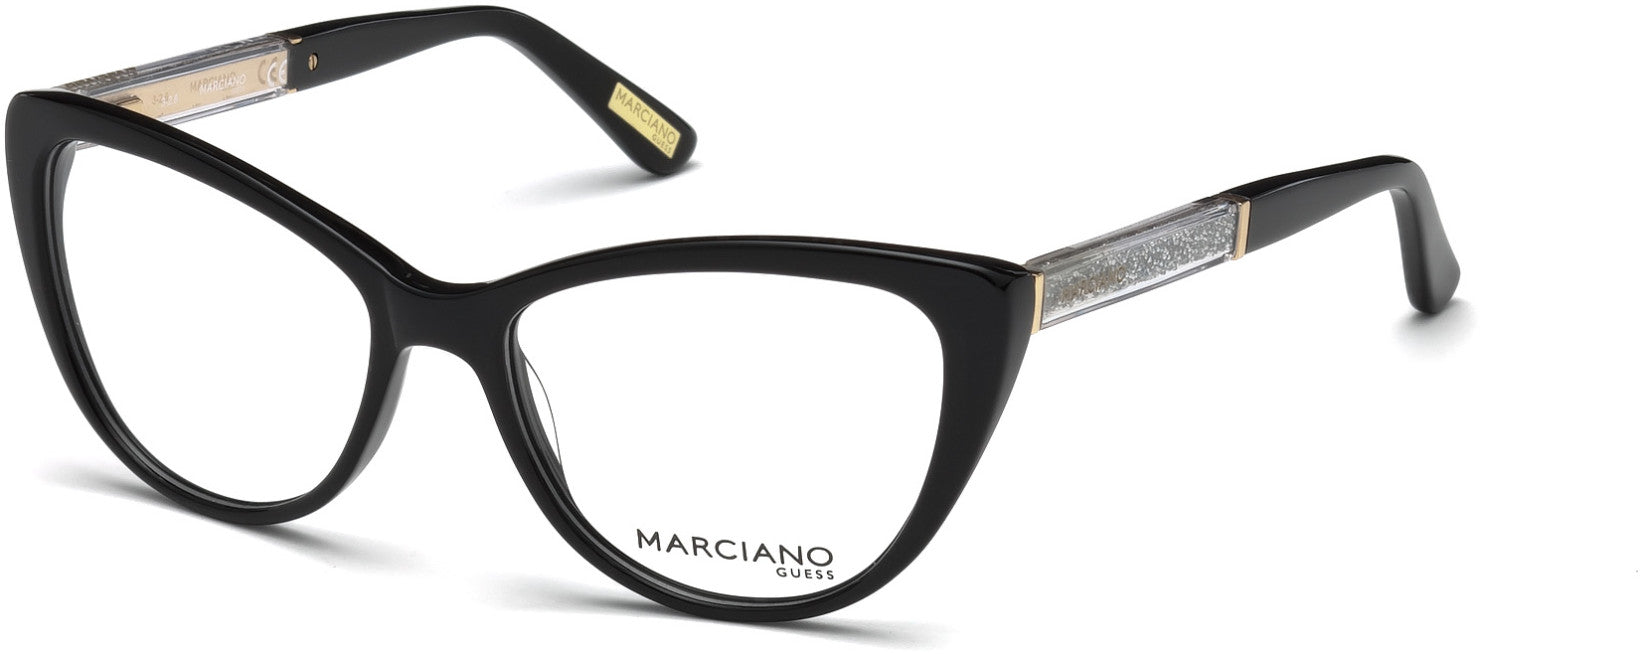 Guess By Marciano GM0312 Cat Eyeglasses 001-001 - Shiny Black